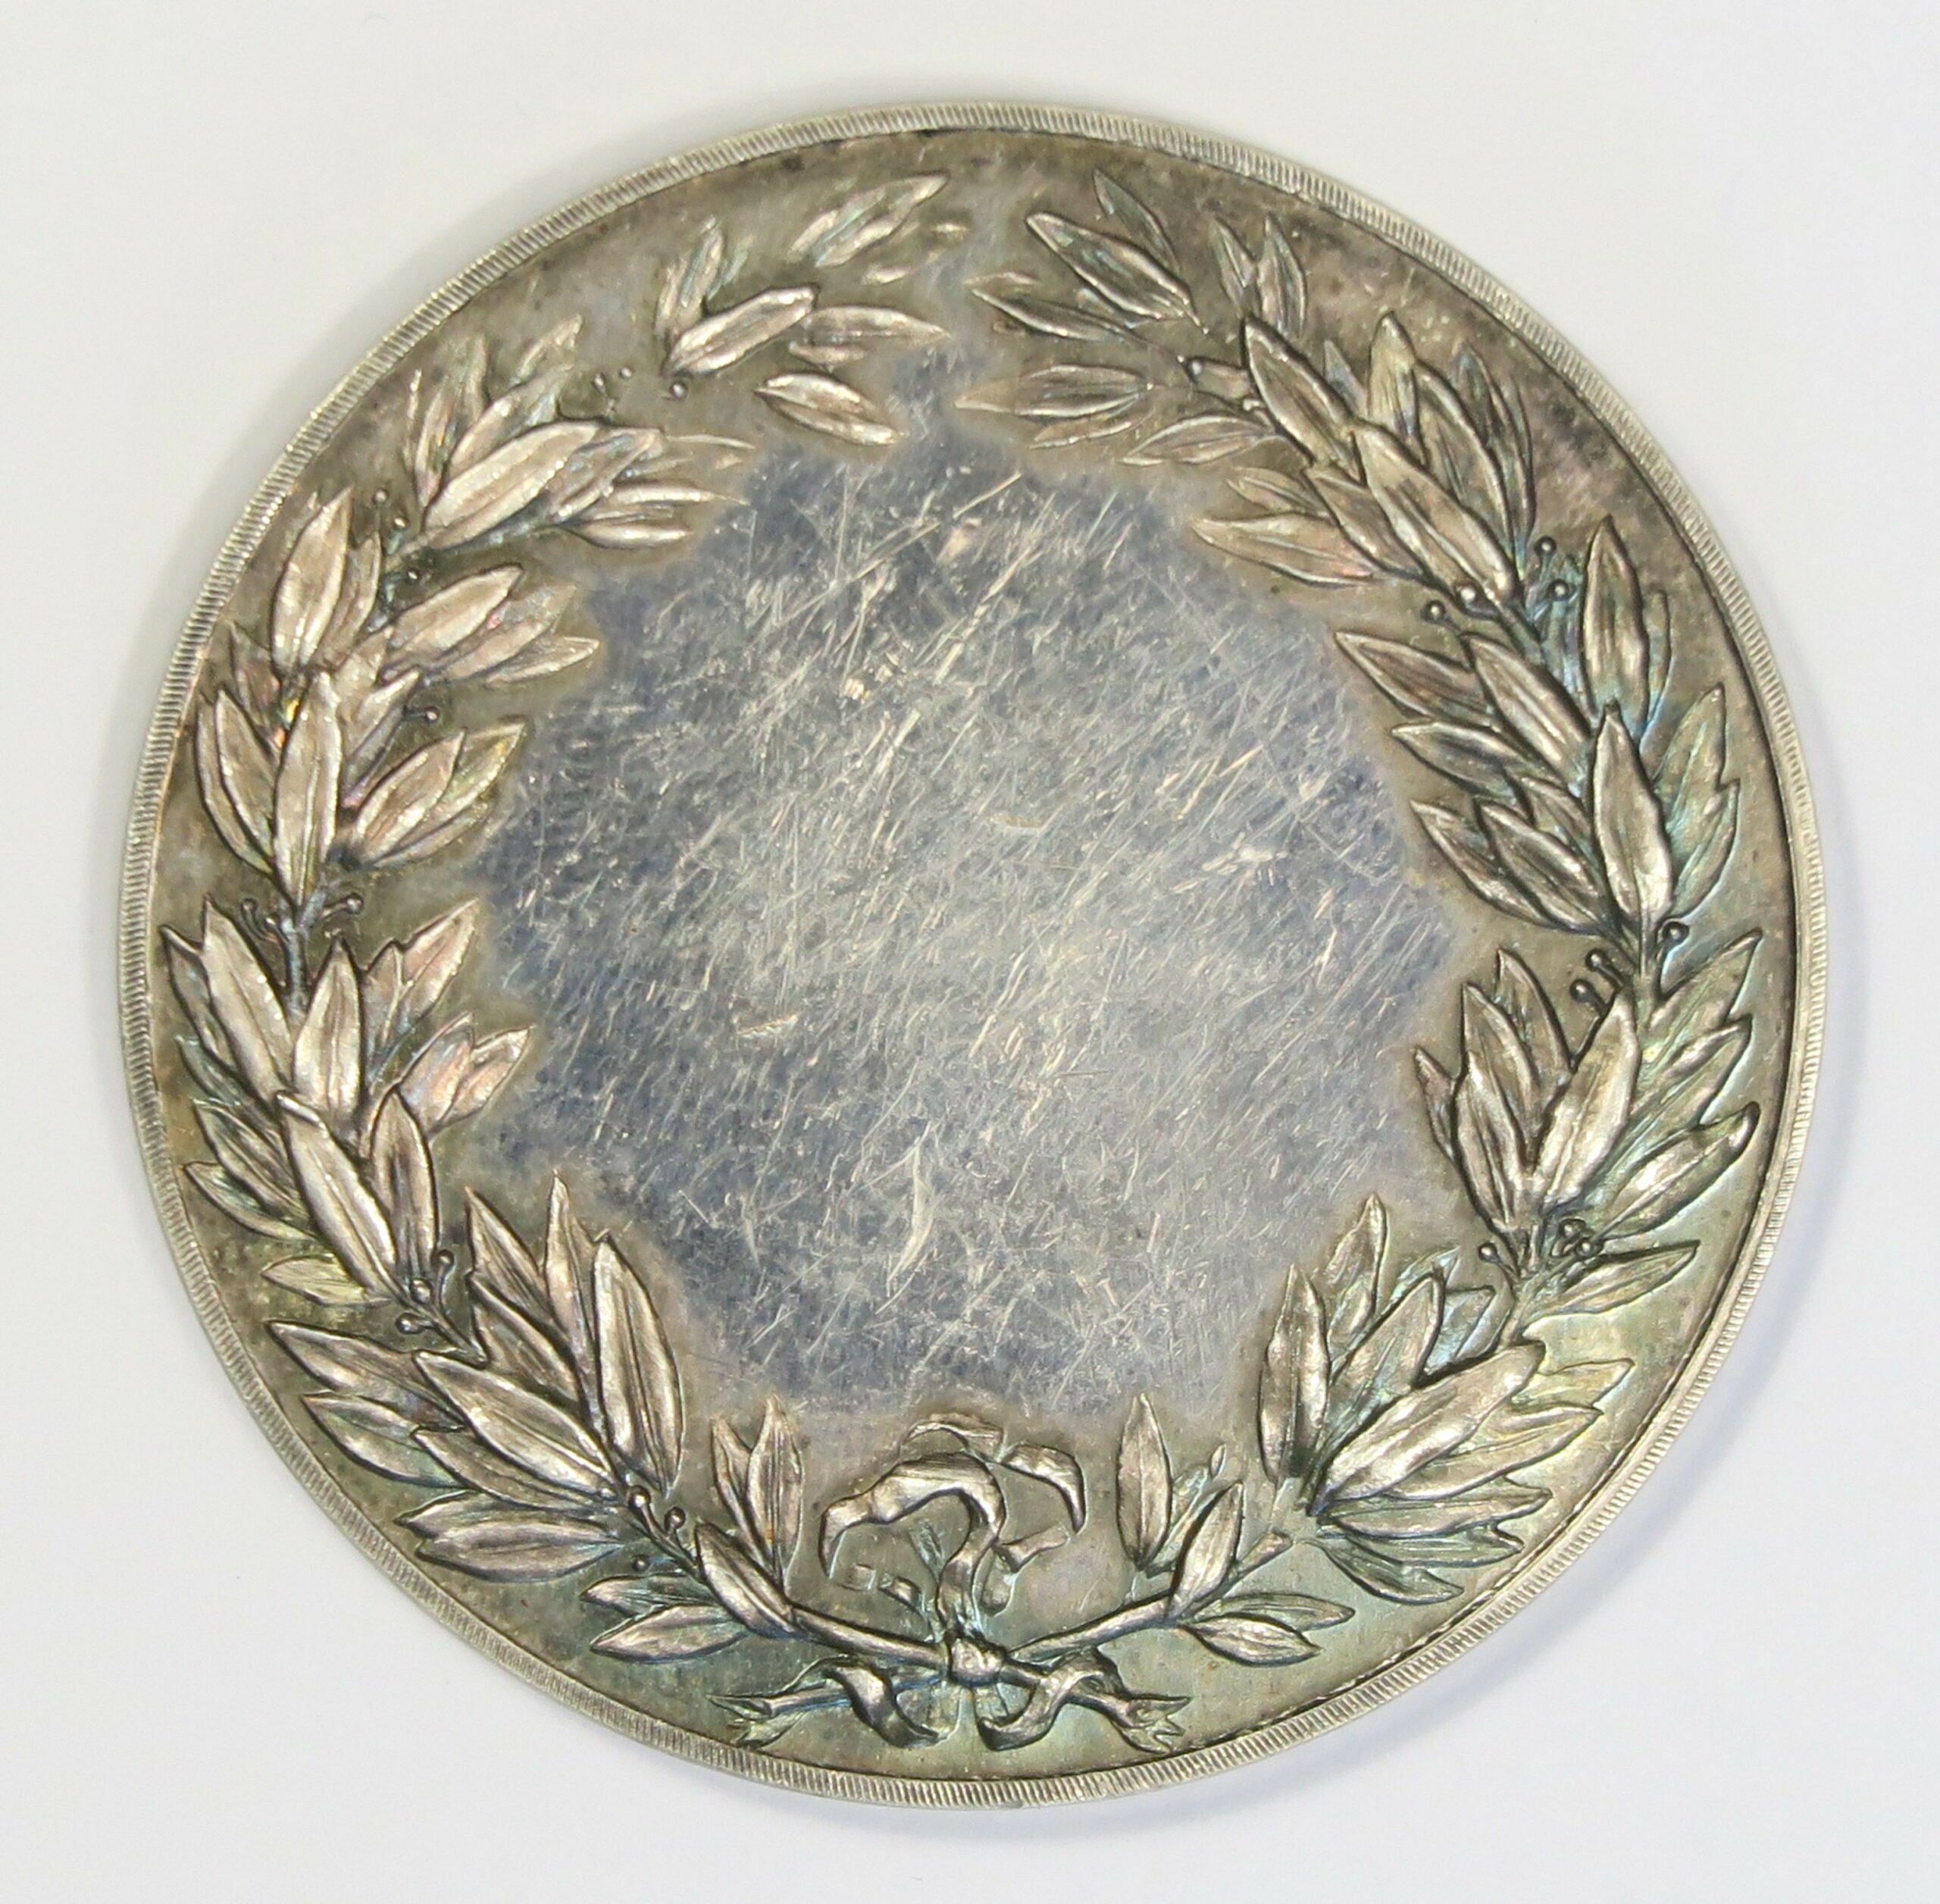 Pomona Flora Silver Medal - colonialcollectables buying and selling ...